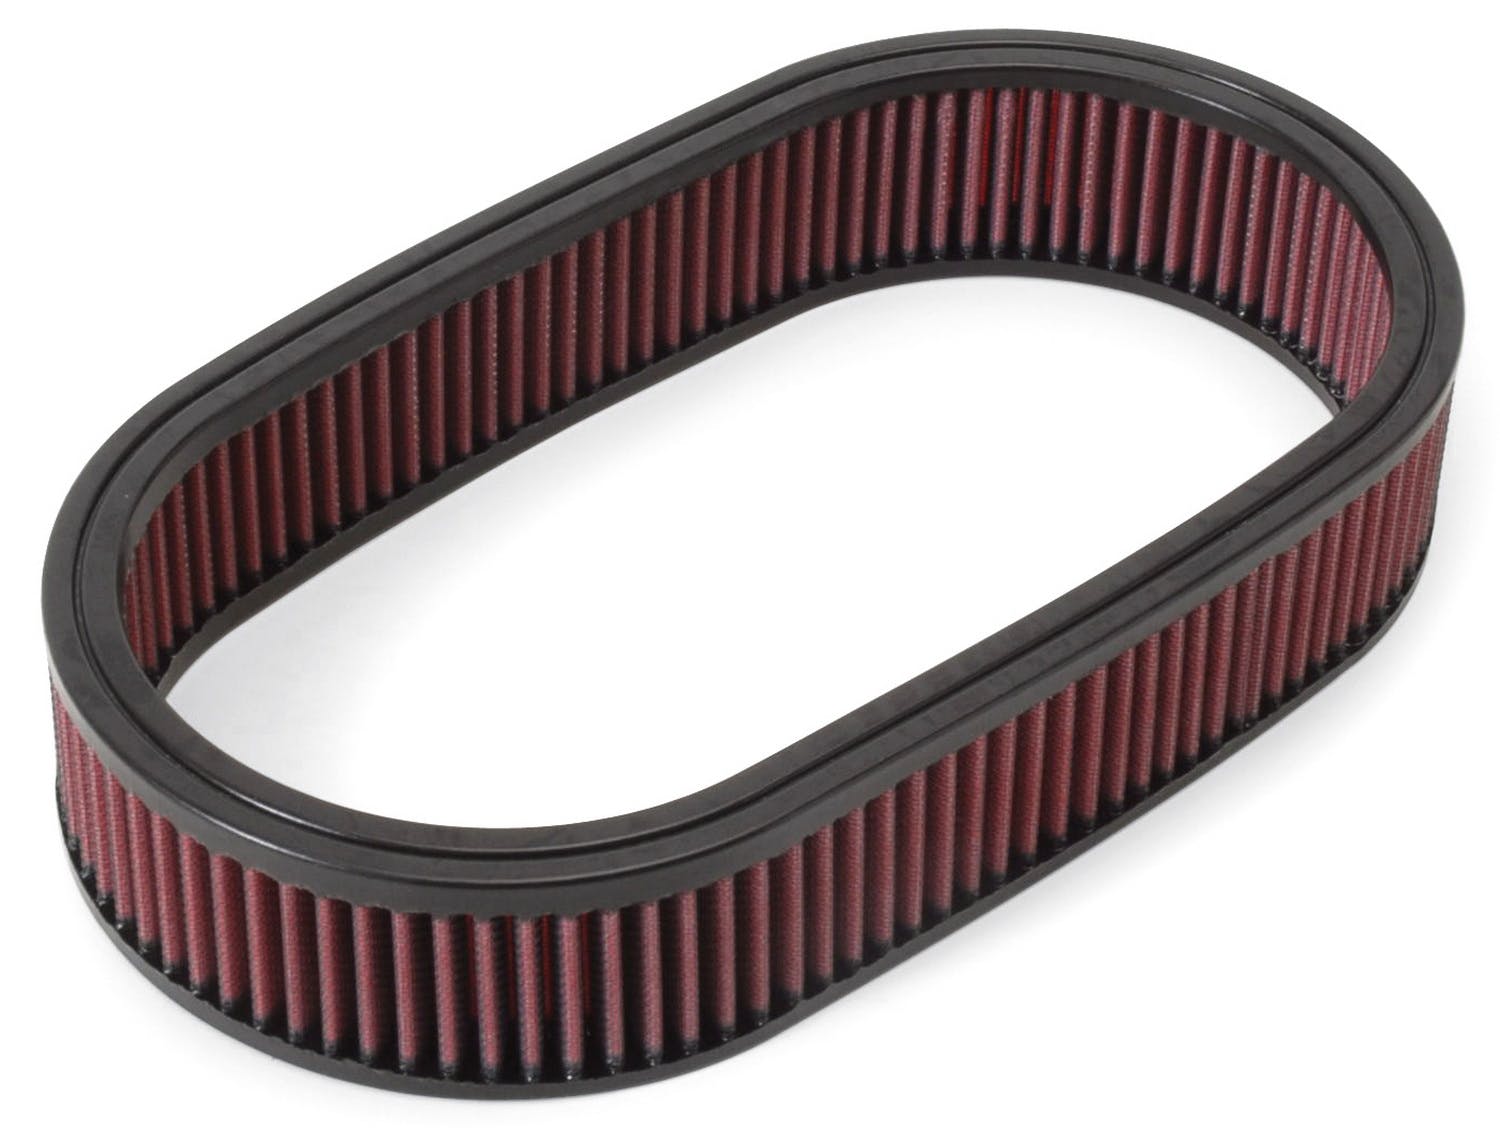 Edelbrock 1220 Replacement Paper Air Filter for Elite Series Oval Air Cleaners